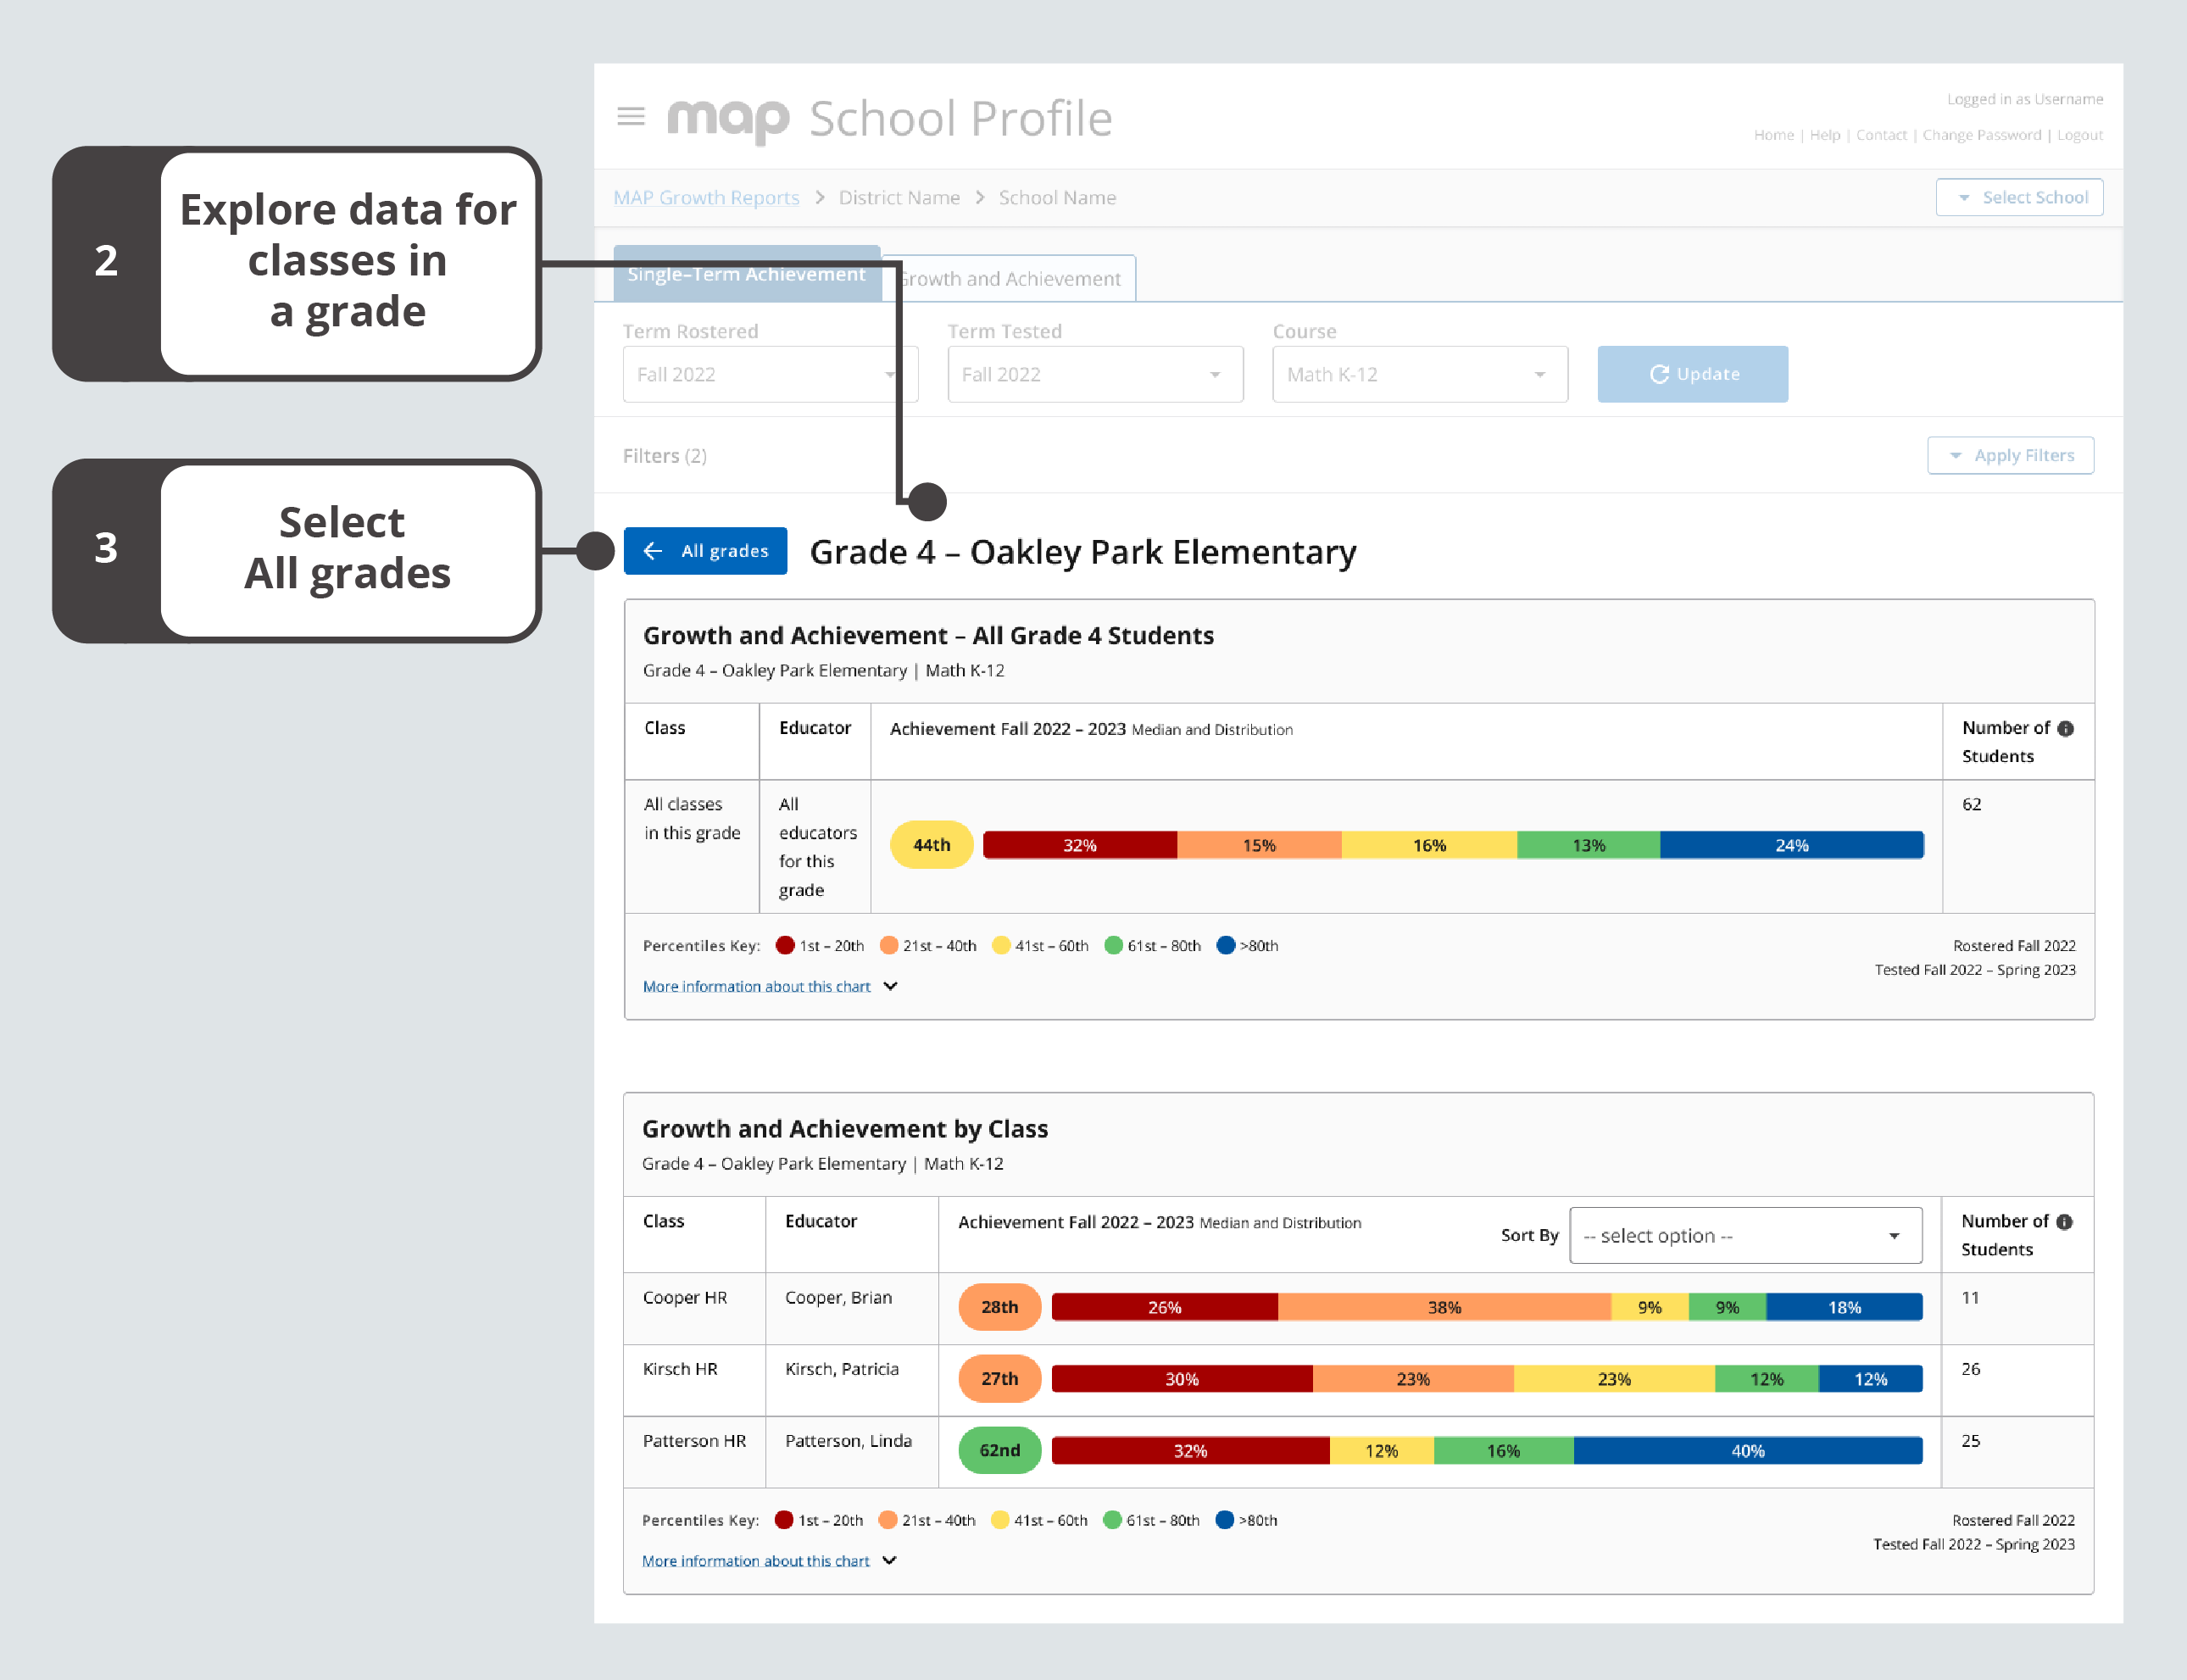 The Single-Term Achievement tab at the class-level view displays data for classes, educators, median percentiles, achievement percentile breakdowns by quintile, and the number of students for a single term; Back is located after Apply Filters.